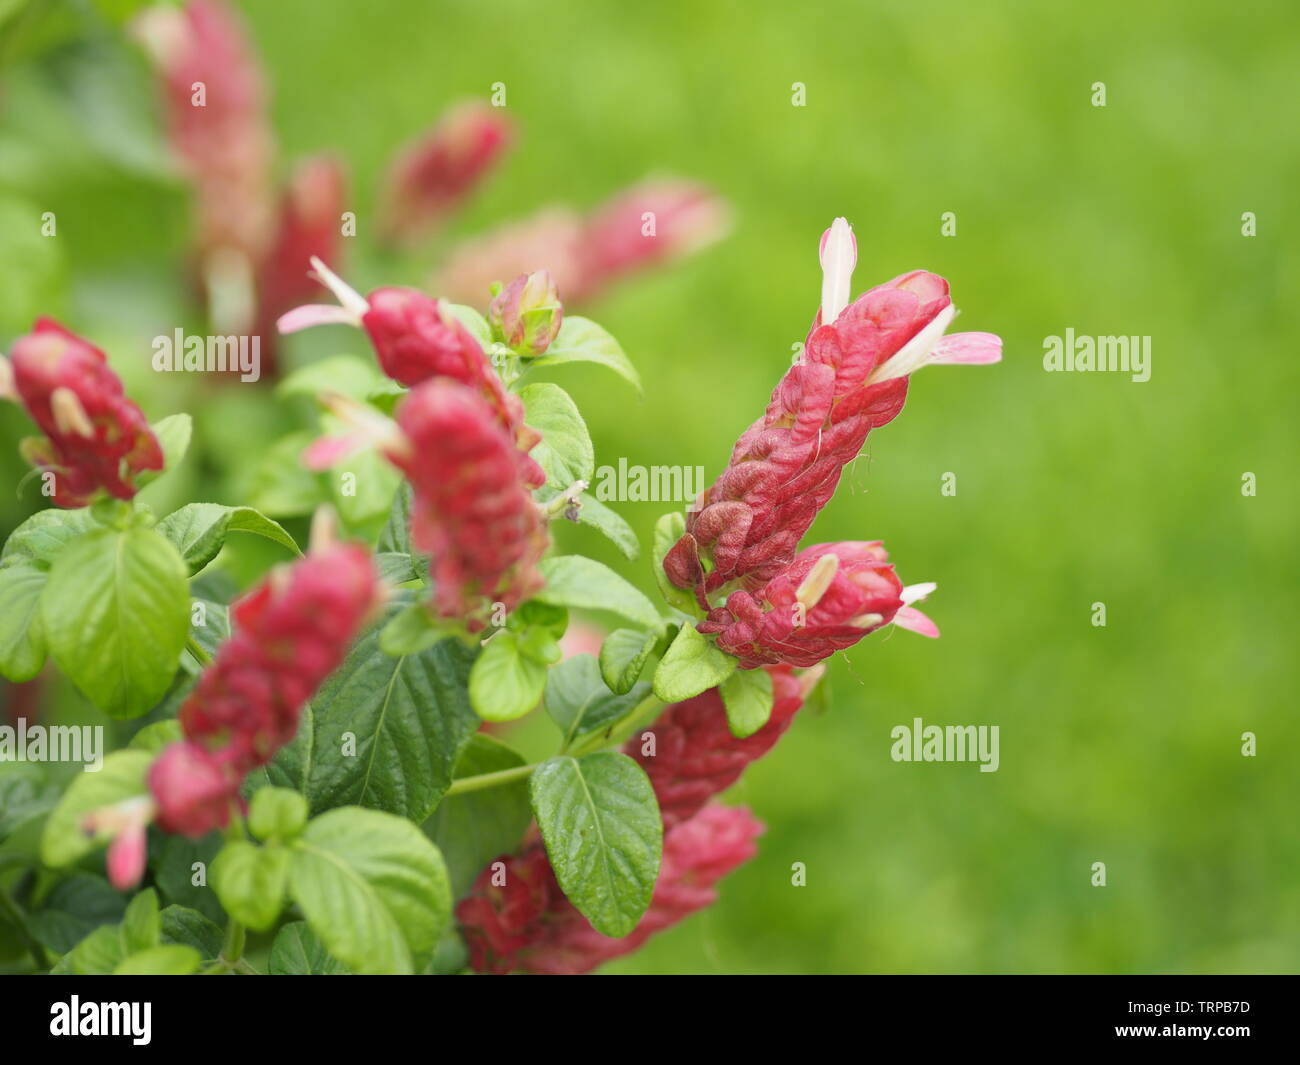 red pink flower Name Panama Queen Plant, The Orange Shrimp Plant, The Coral Aphelandra Single leaf Sorting alternately Lanceolate The flower is a big Stock Photo